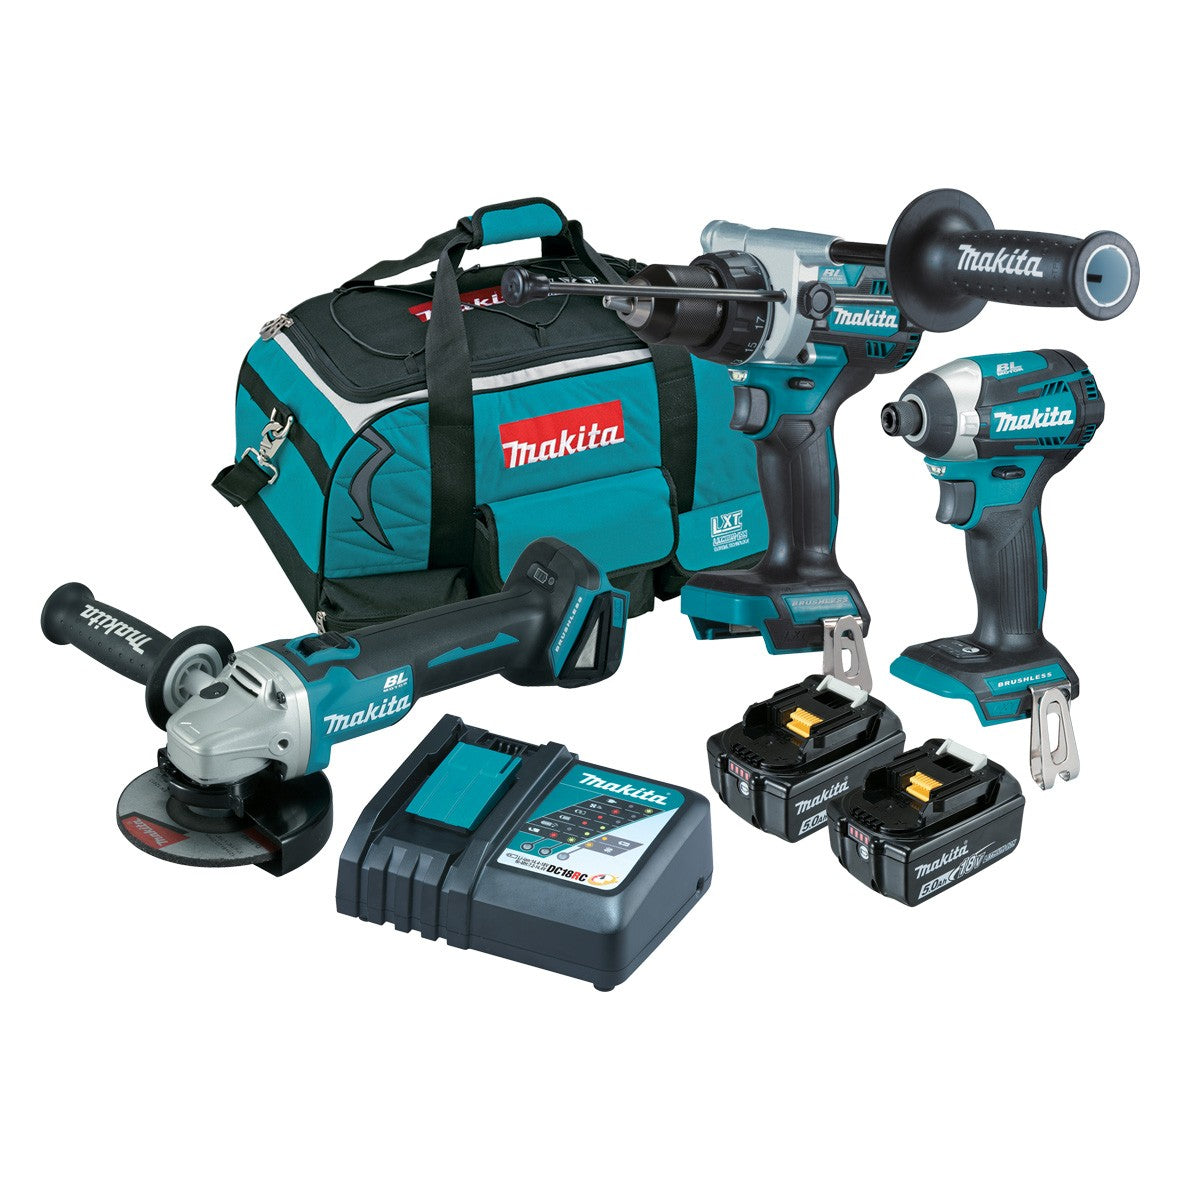 18V 5.0Ah 3Pce Brushless Hammer Driver Drill + Impact Driver + Slide Switch Angle Grinder Kit DLX3149TX1 by Makita